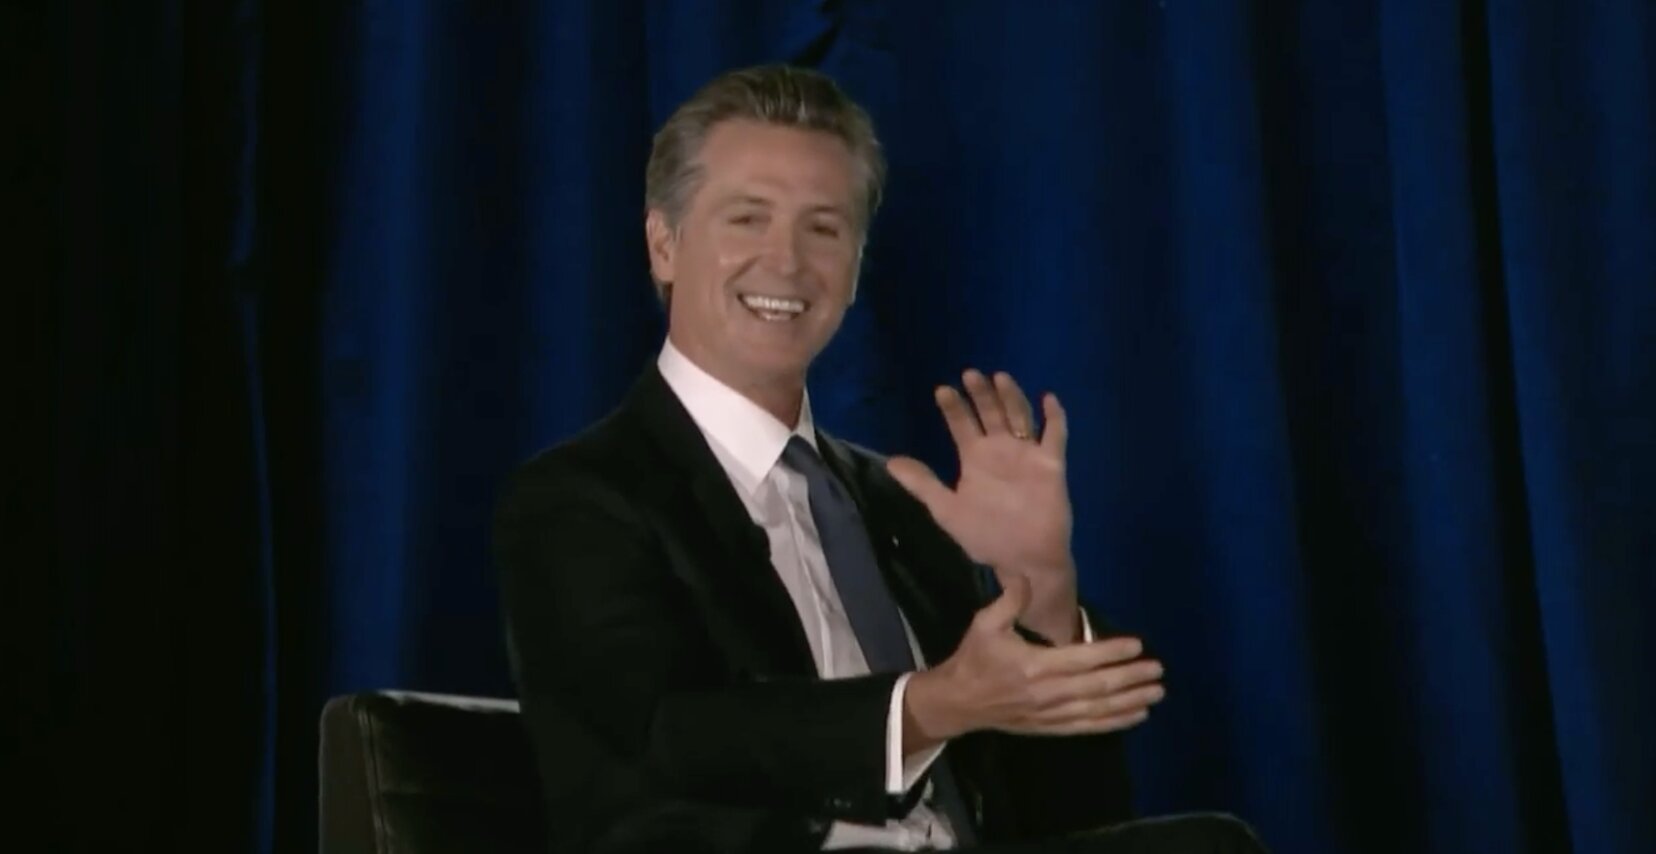 LO and BEHOLD Gavin Newsom all of the sudden makes public appearance…SITTING DOWN! Says he skipped climate change summit “to spend Halloween with family”